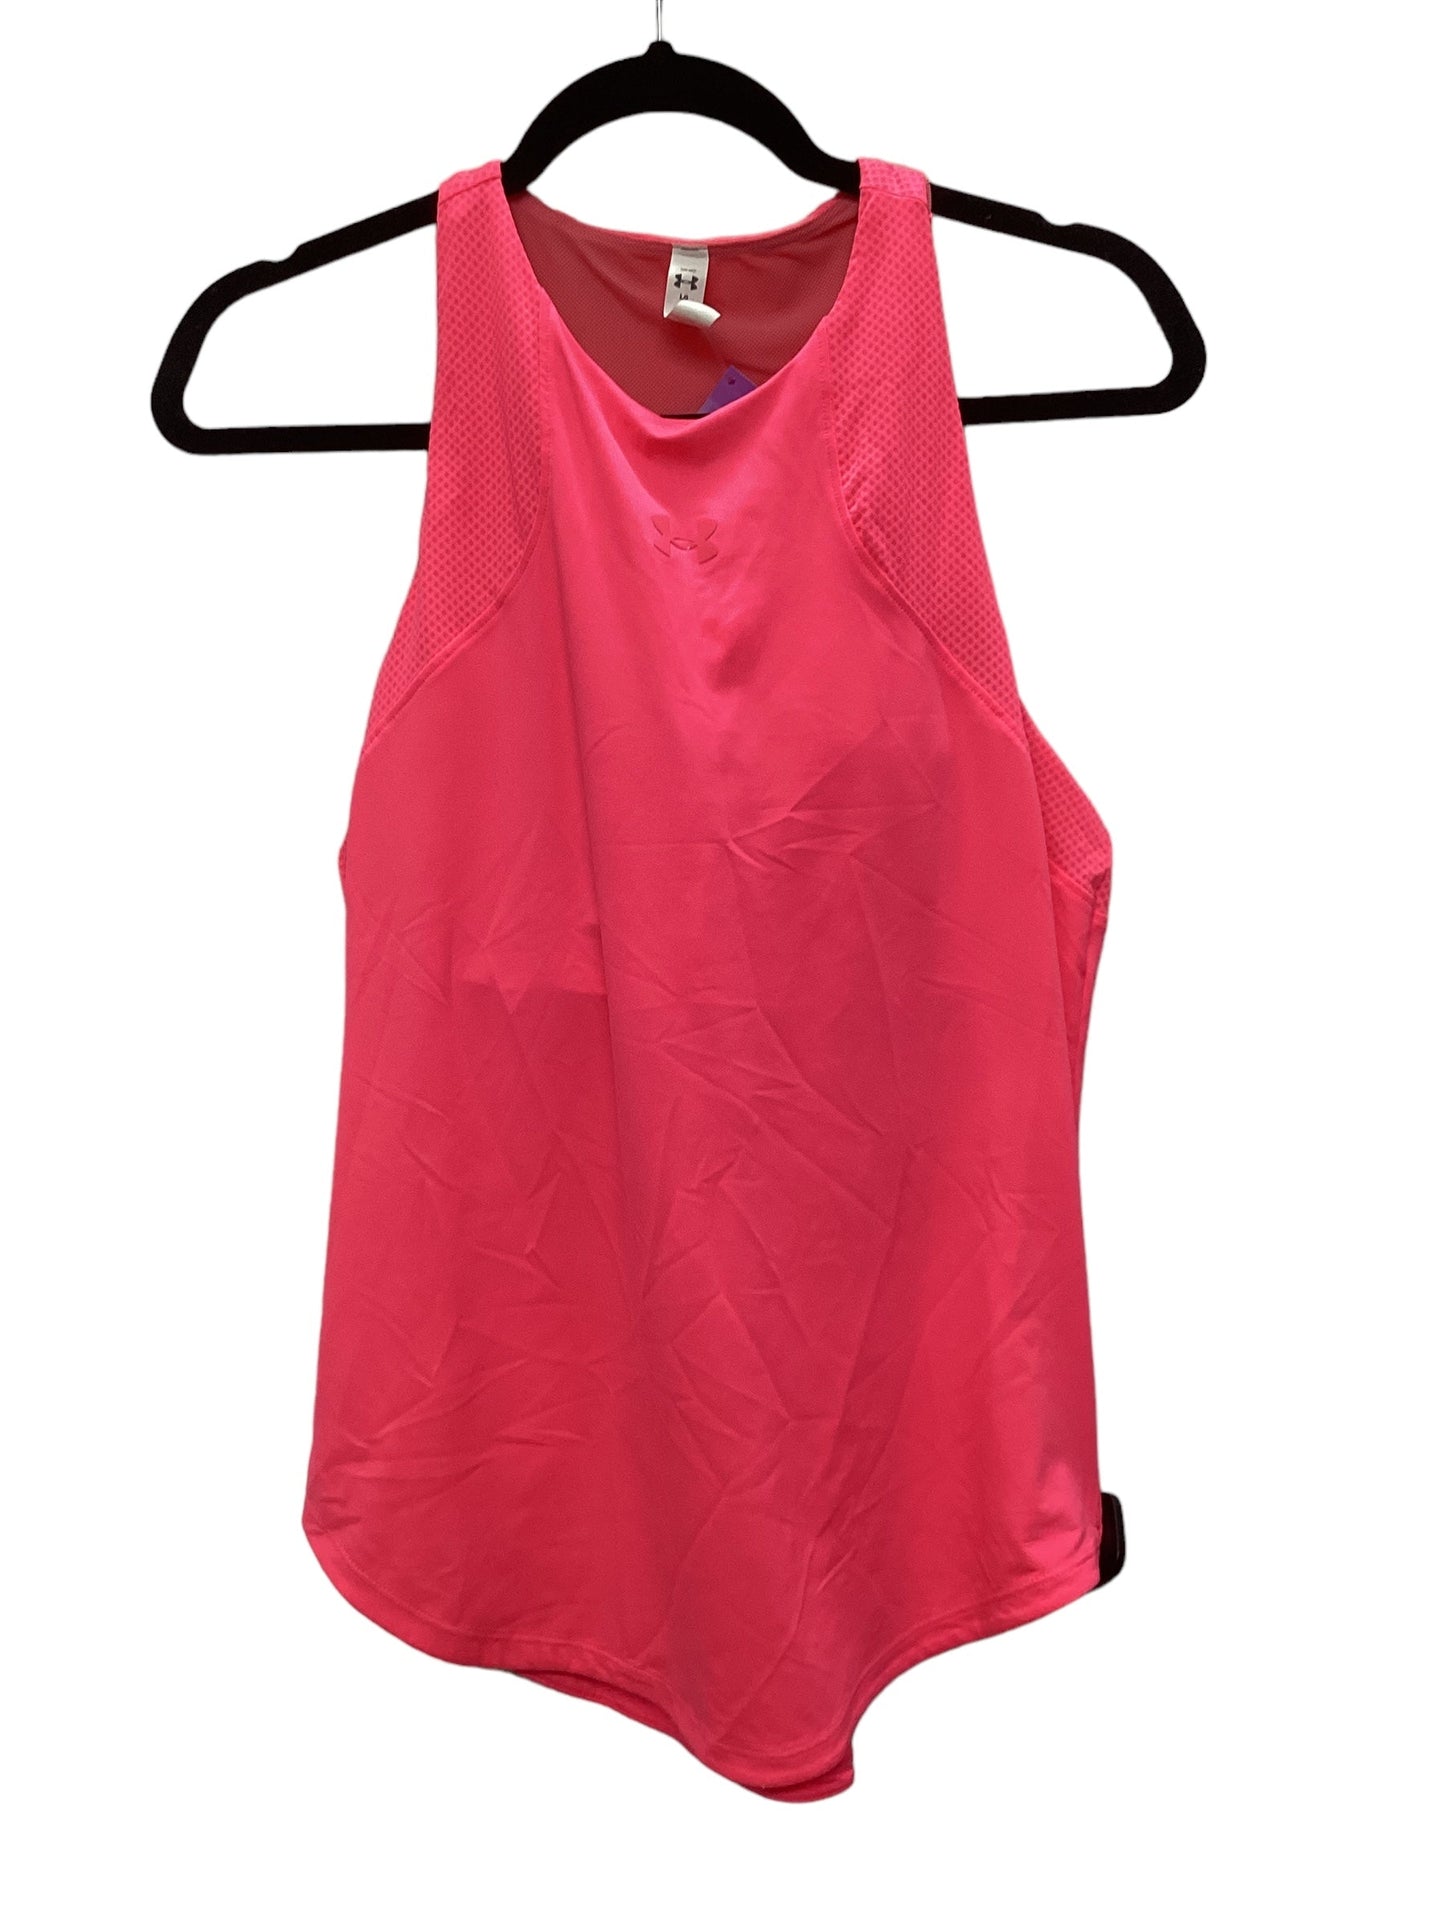 Pink Athletic Tank Top Under Armour, Size L